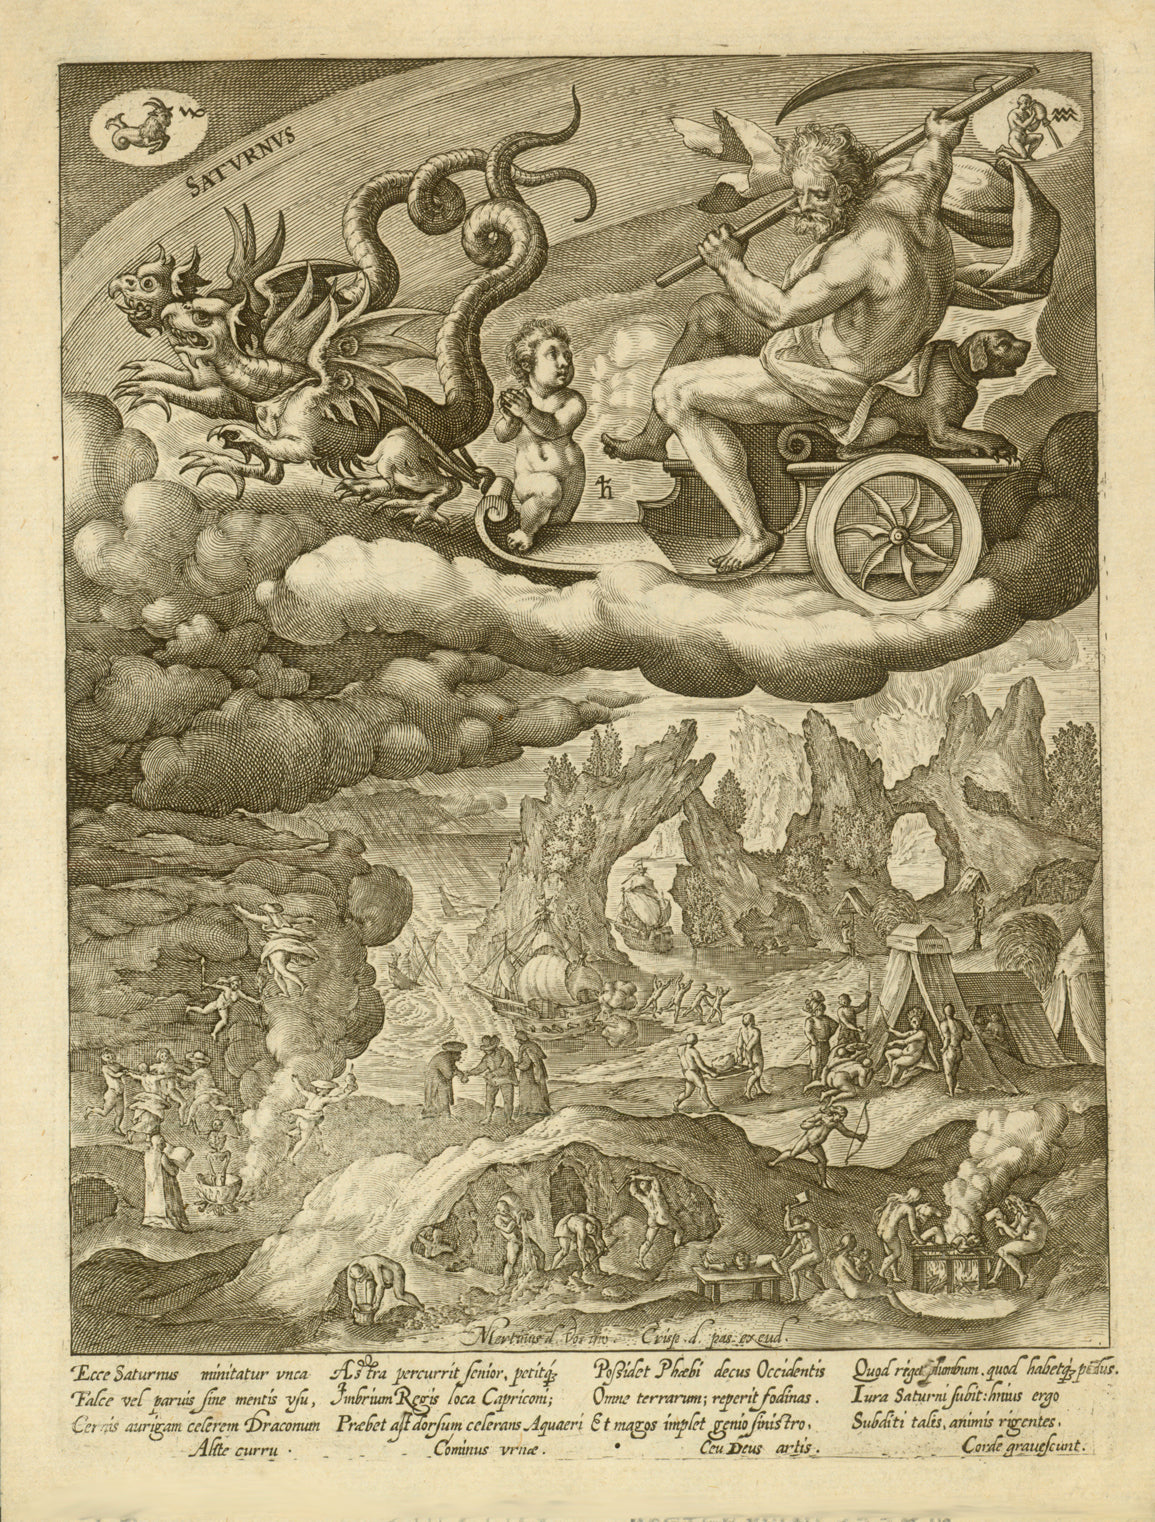 Copper etching by Marten de Vos (1532-1603)  After the drawing by Crispijn (also Crispin) van de Passe (1564-1637)  Saturnus swinging a scythe on his chariot pulled by two mythical creatures (winged dragons) through the clouds.  Below emblematically depicted men working in a lead  mine, a war ship, cannibals having dinner, witches and many other hard to explain hints. In the upper corners we have astrological images of Capricorn (left) and Aquarius (right)